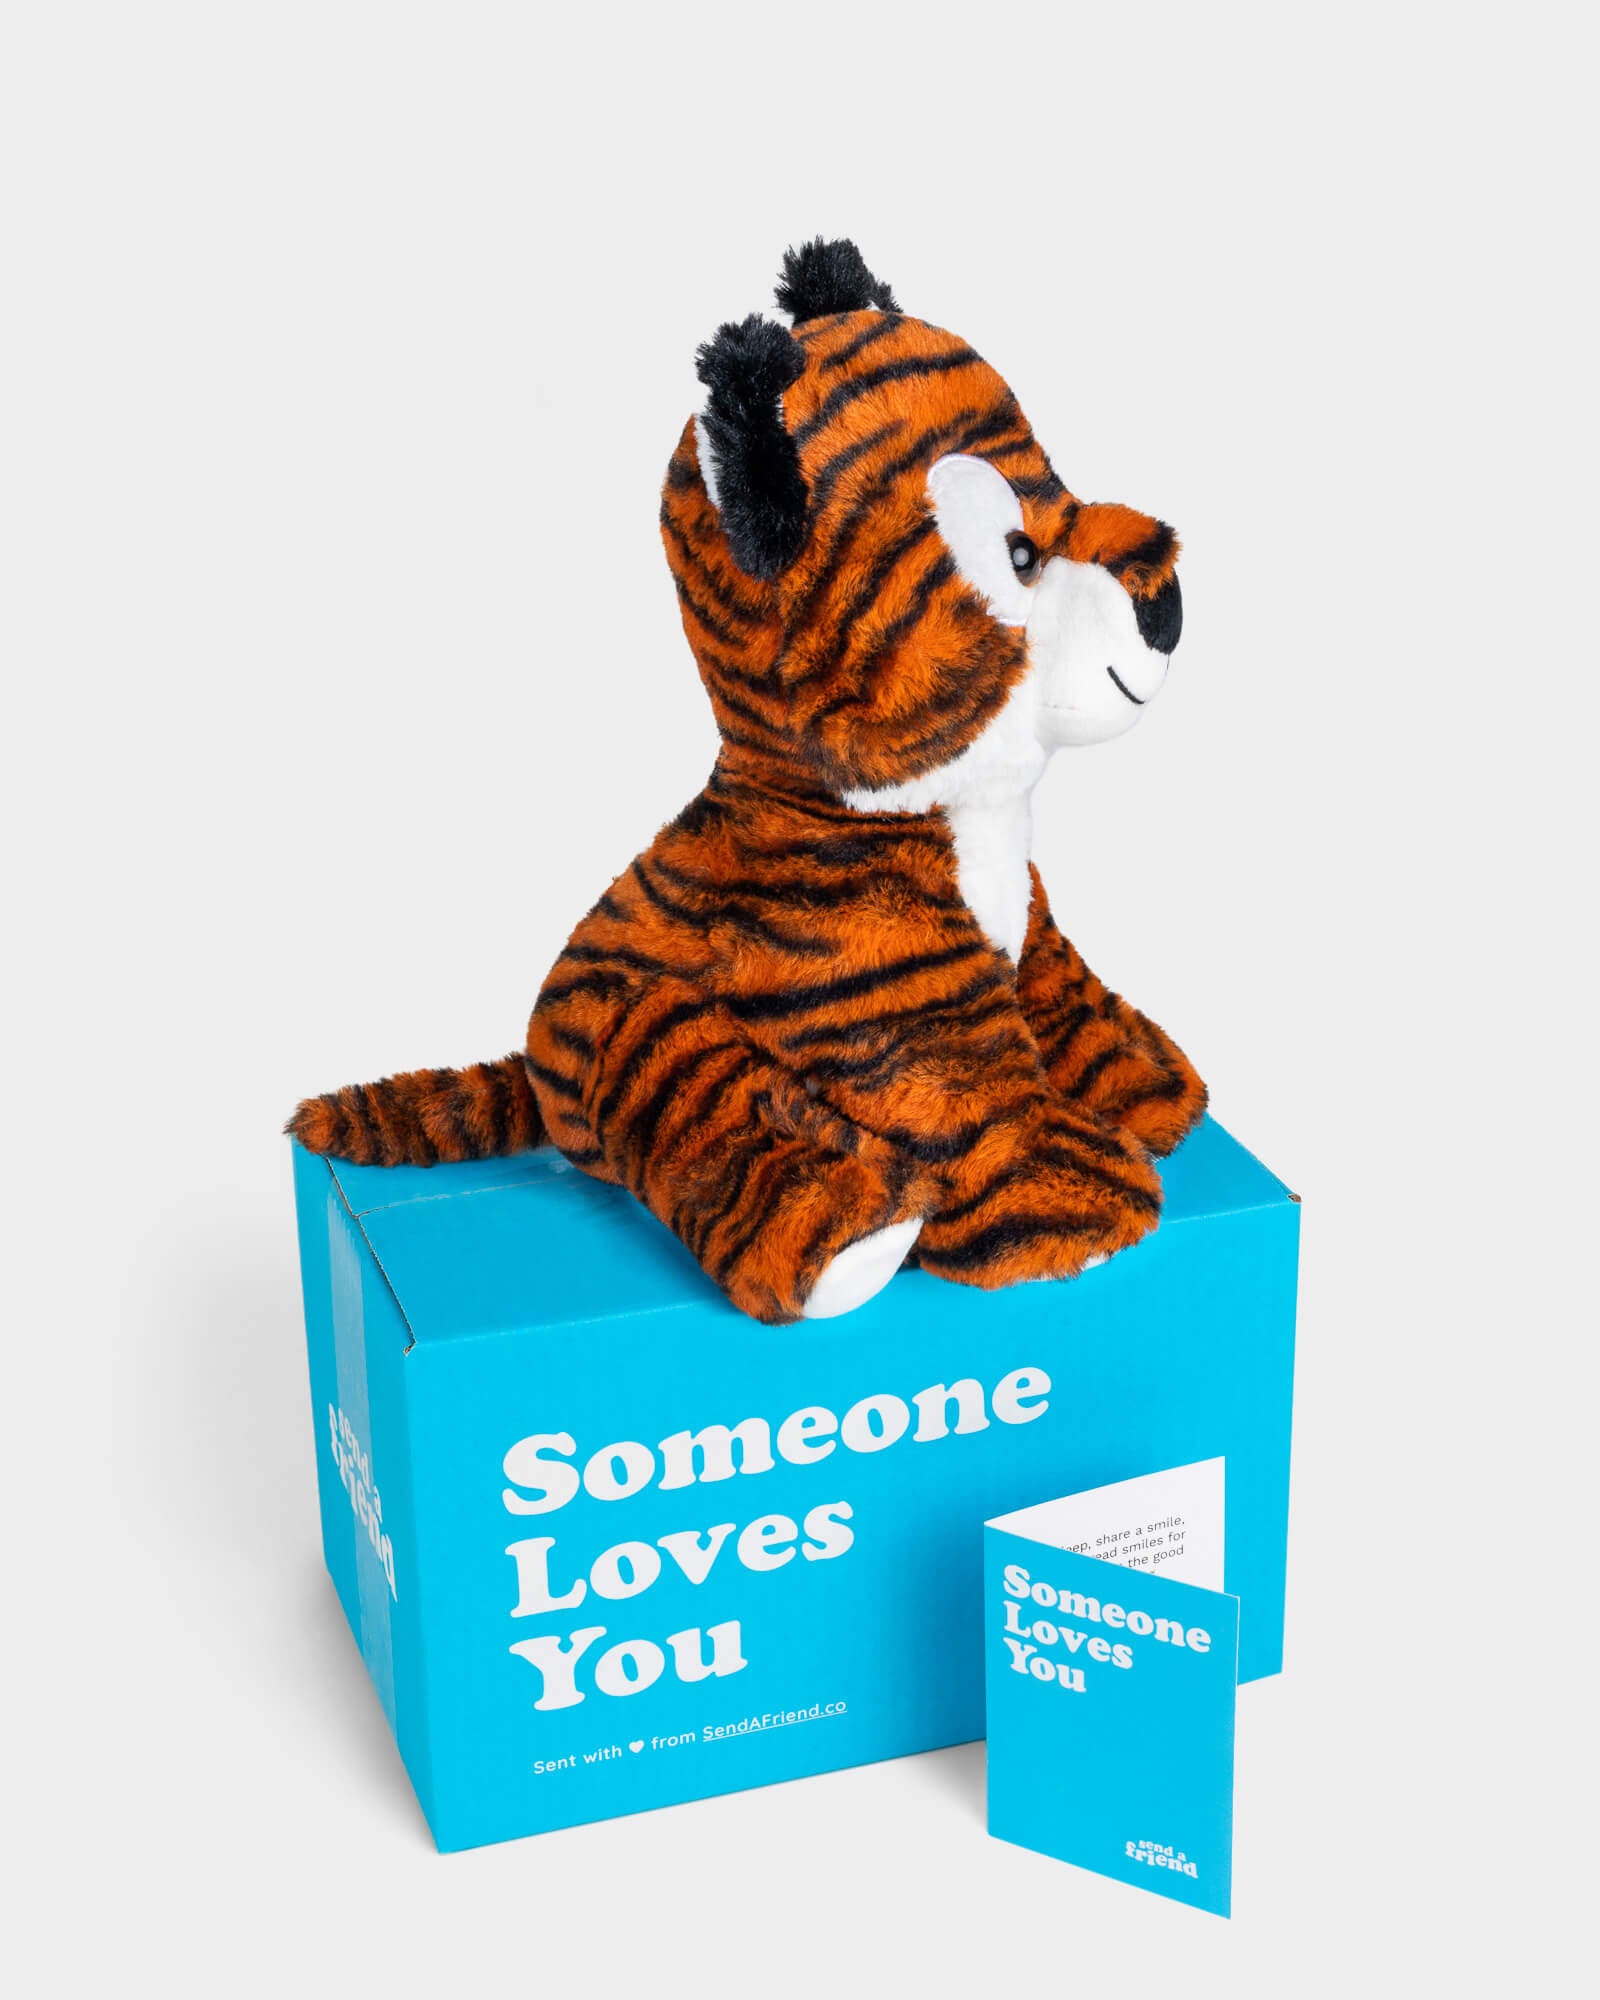 Side view photo of orange and black striped Tilly the Tiger plushie, Someone Loves You box, and note card